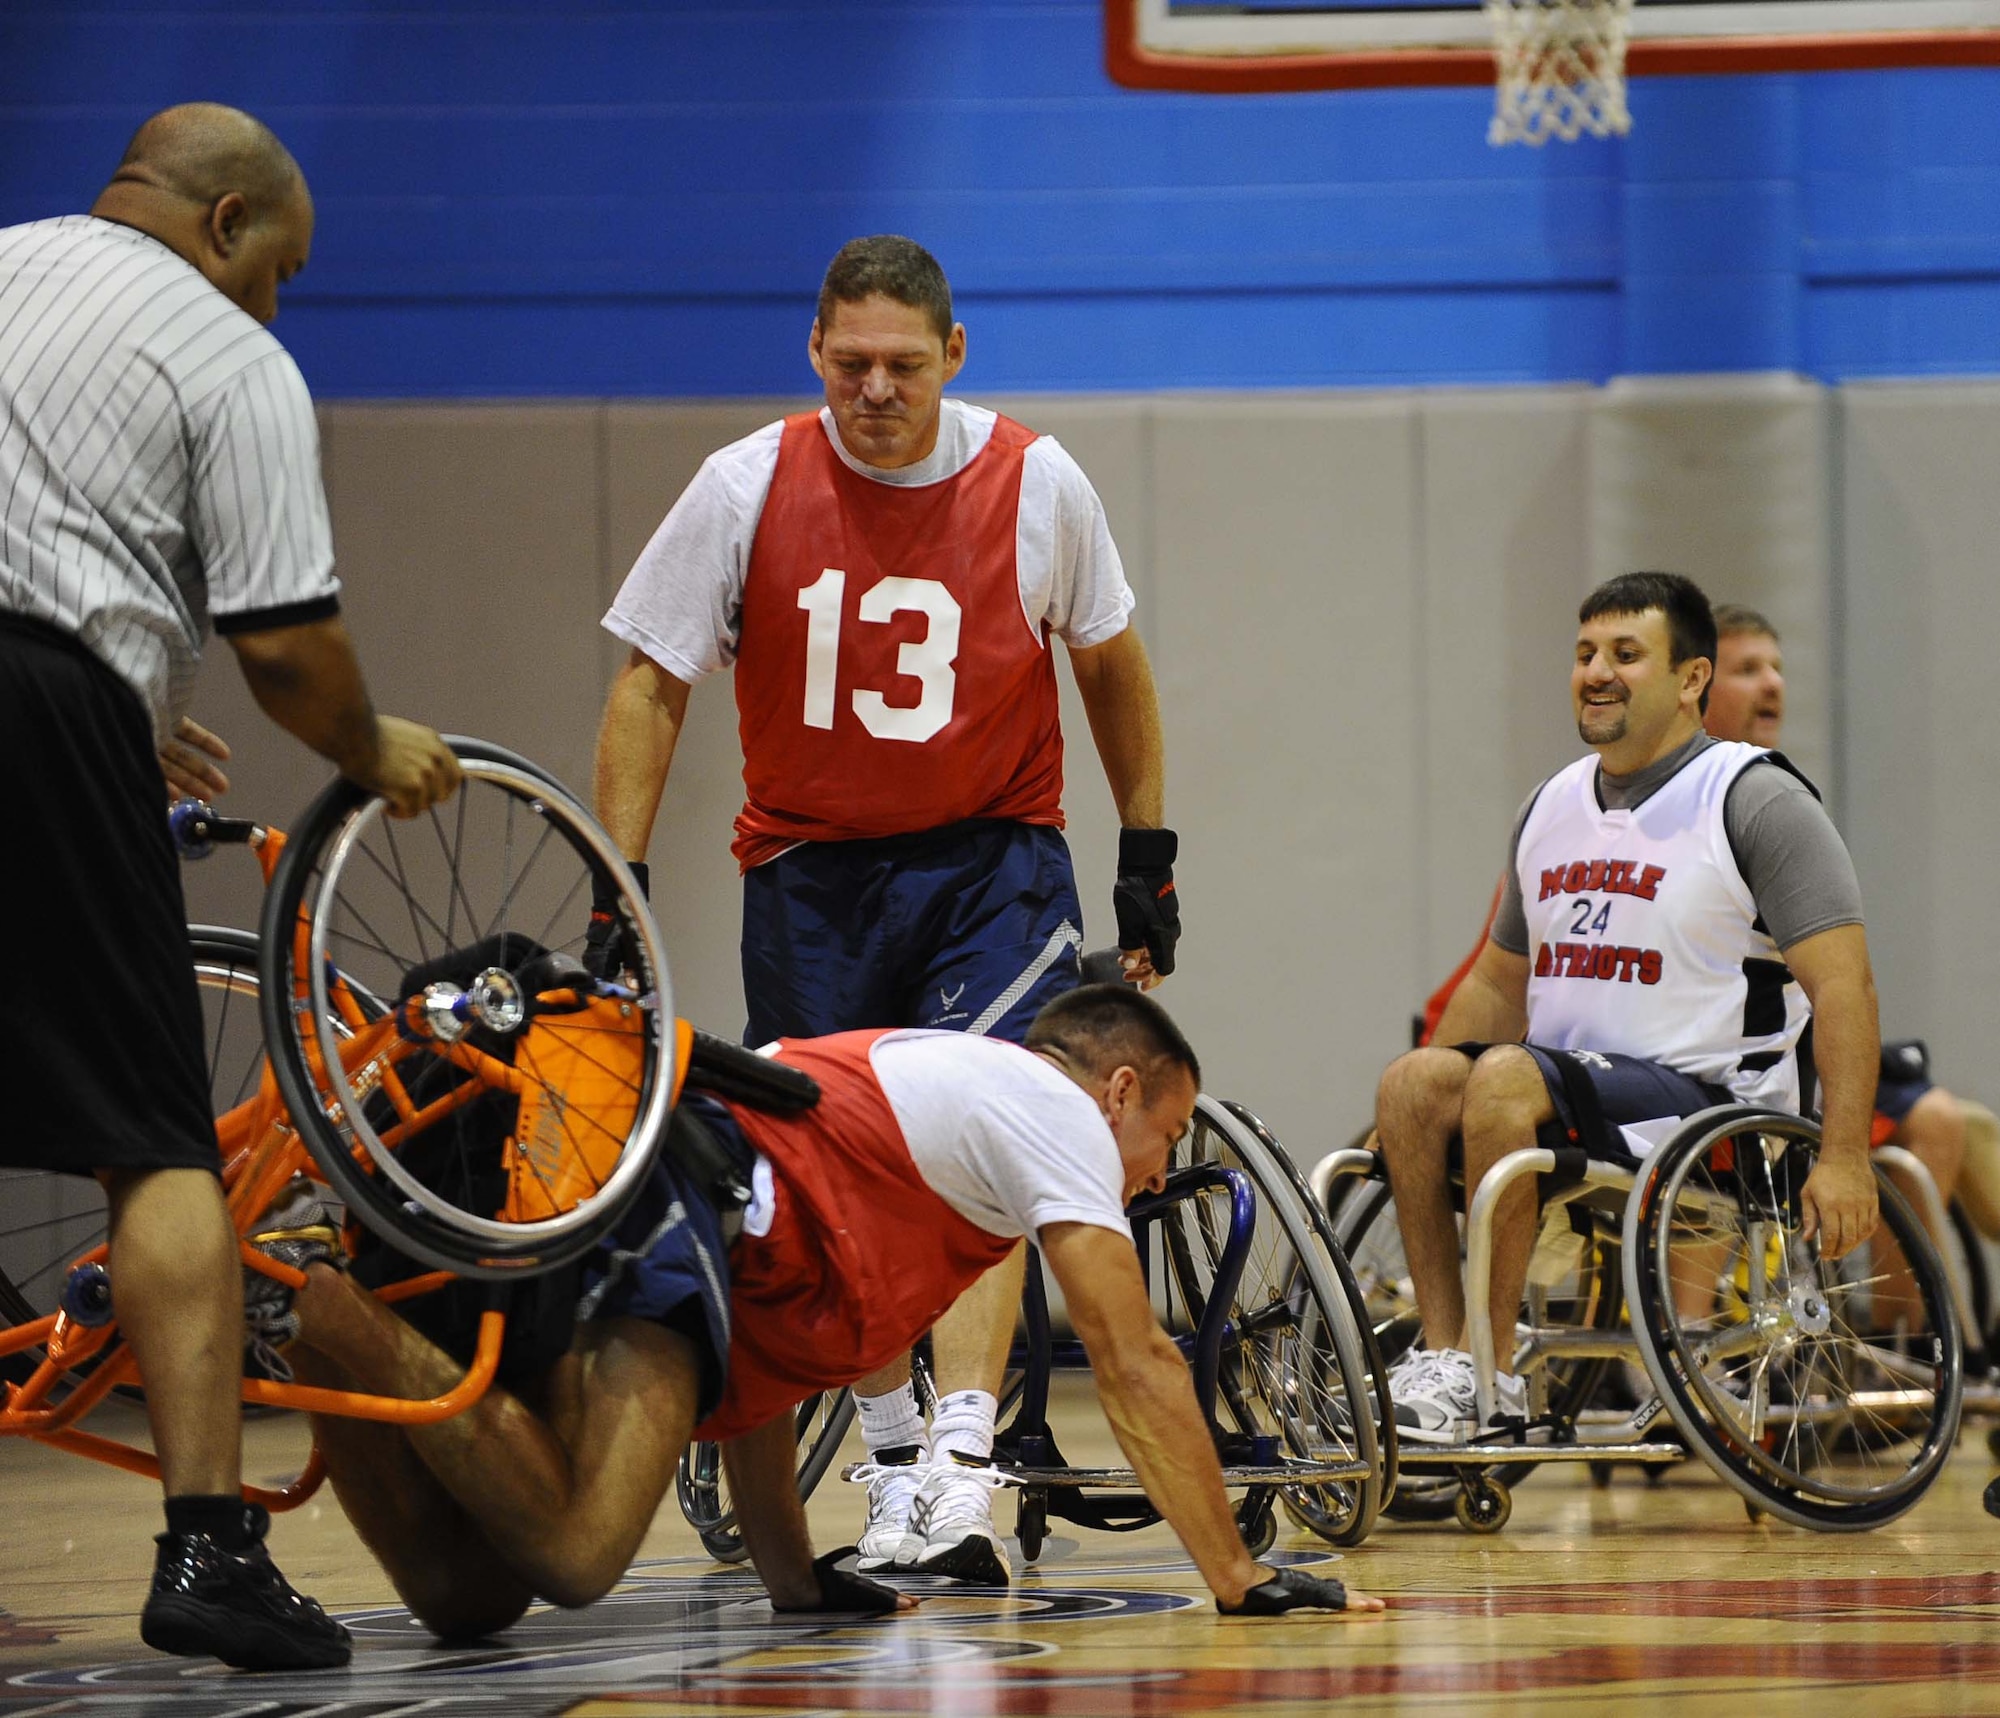 Col. Ben McMullen, acting 1st Special Operations Wing vice commander, attempts to help Capt. Ben Self, 1st Special Operation Wing executive officer, recover from his tipped-over wheelchair at the fourth annual Wheelchair Basketball Exhibition Game at the Aderholt Fitness Center at Hurlburt Field Oct. 1.  (U.S. Air Force photo by Senior Airman Julianne Showalter)